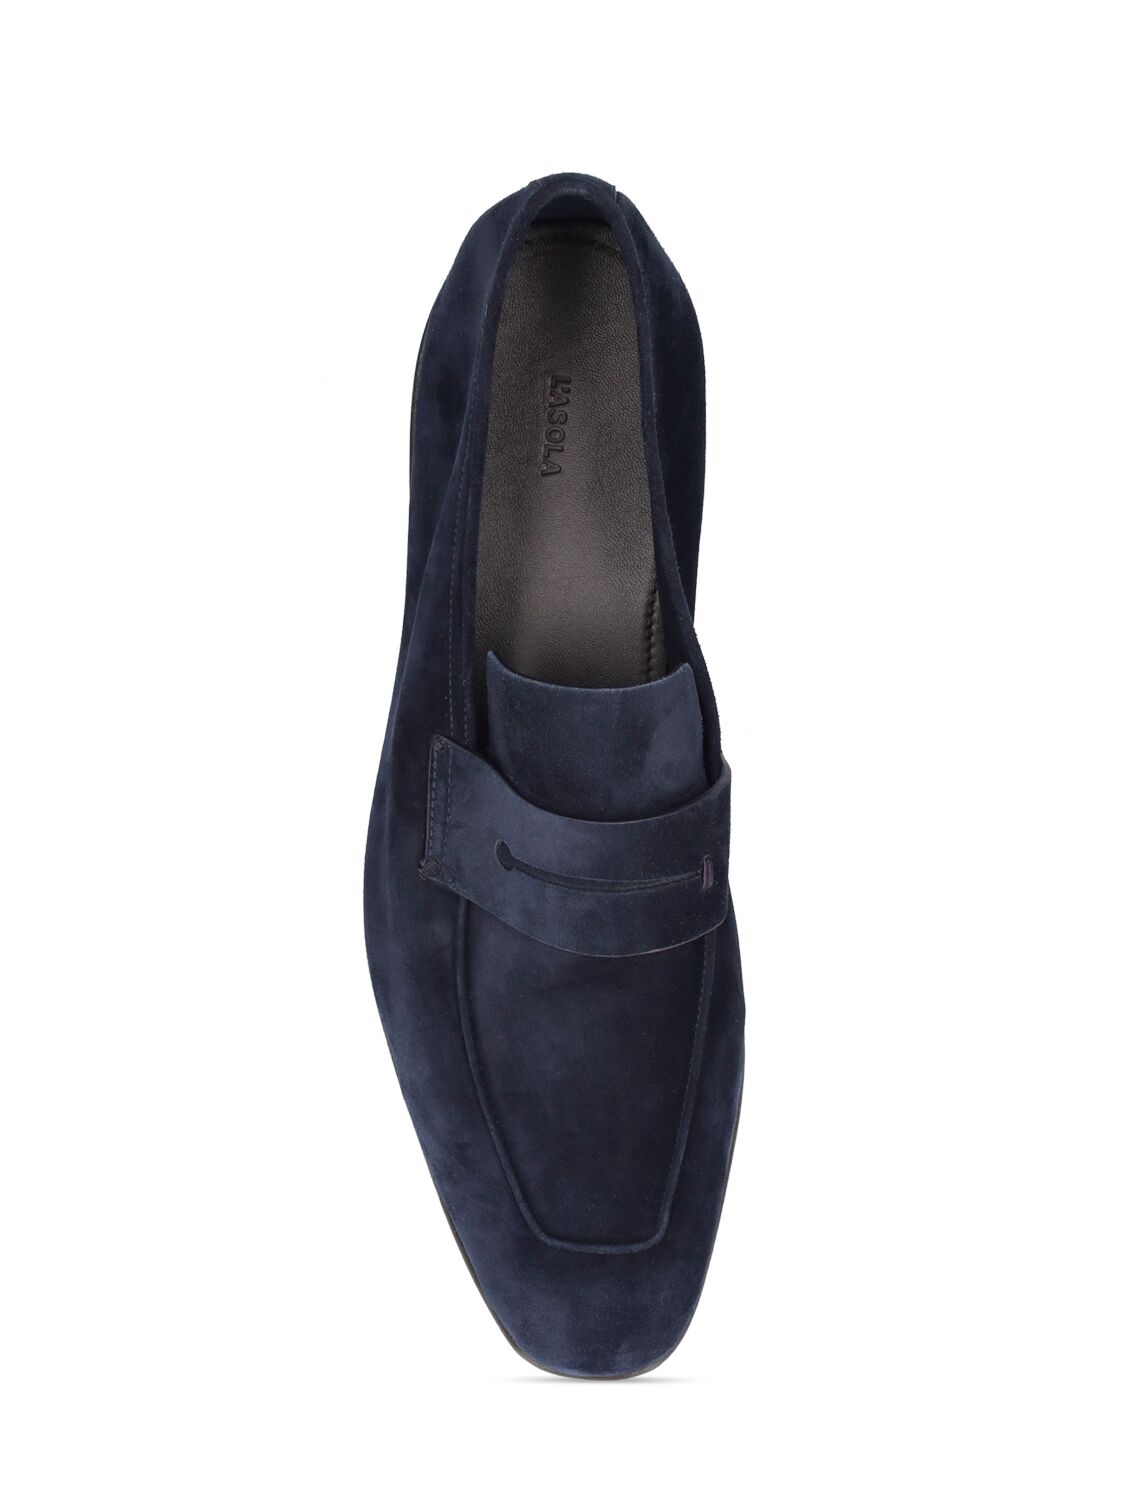 Shop Zegna Suede Loafers In Navy